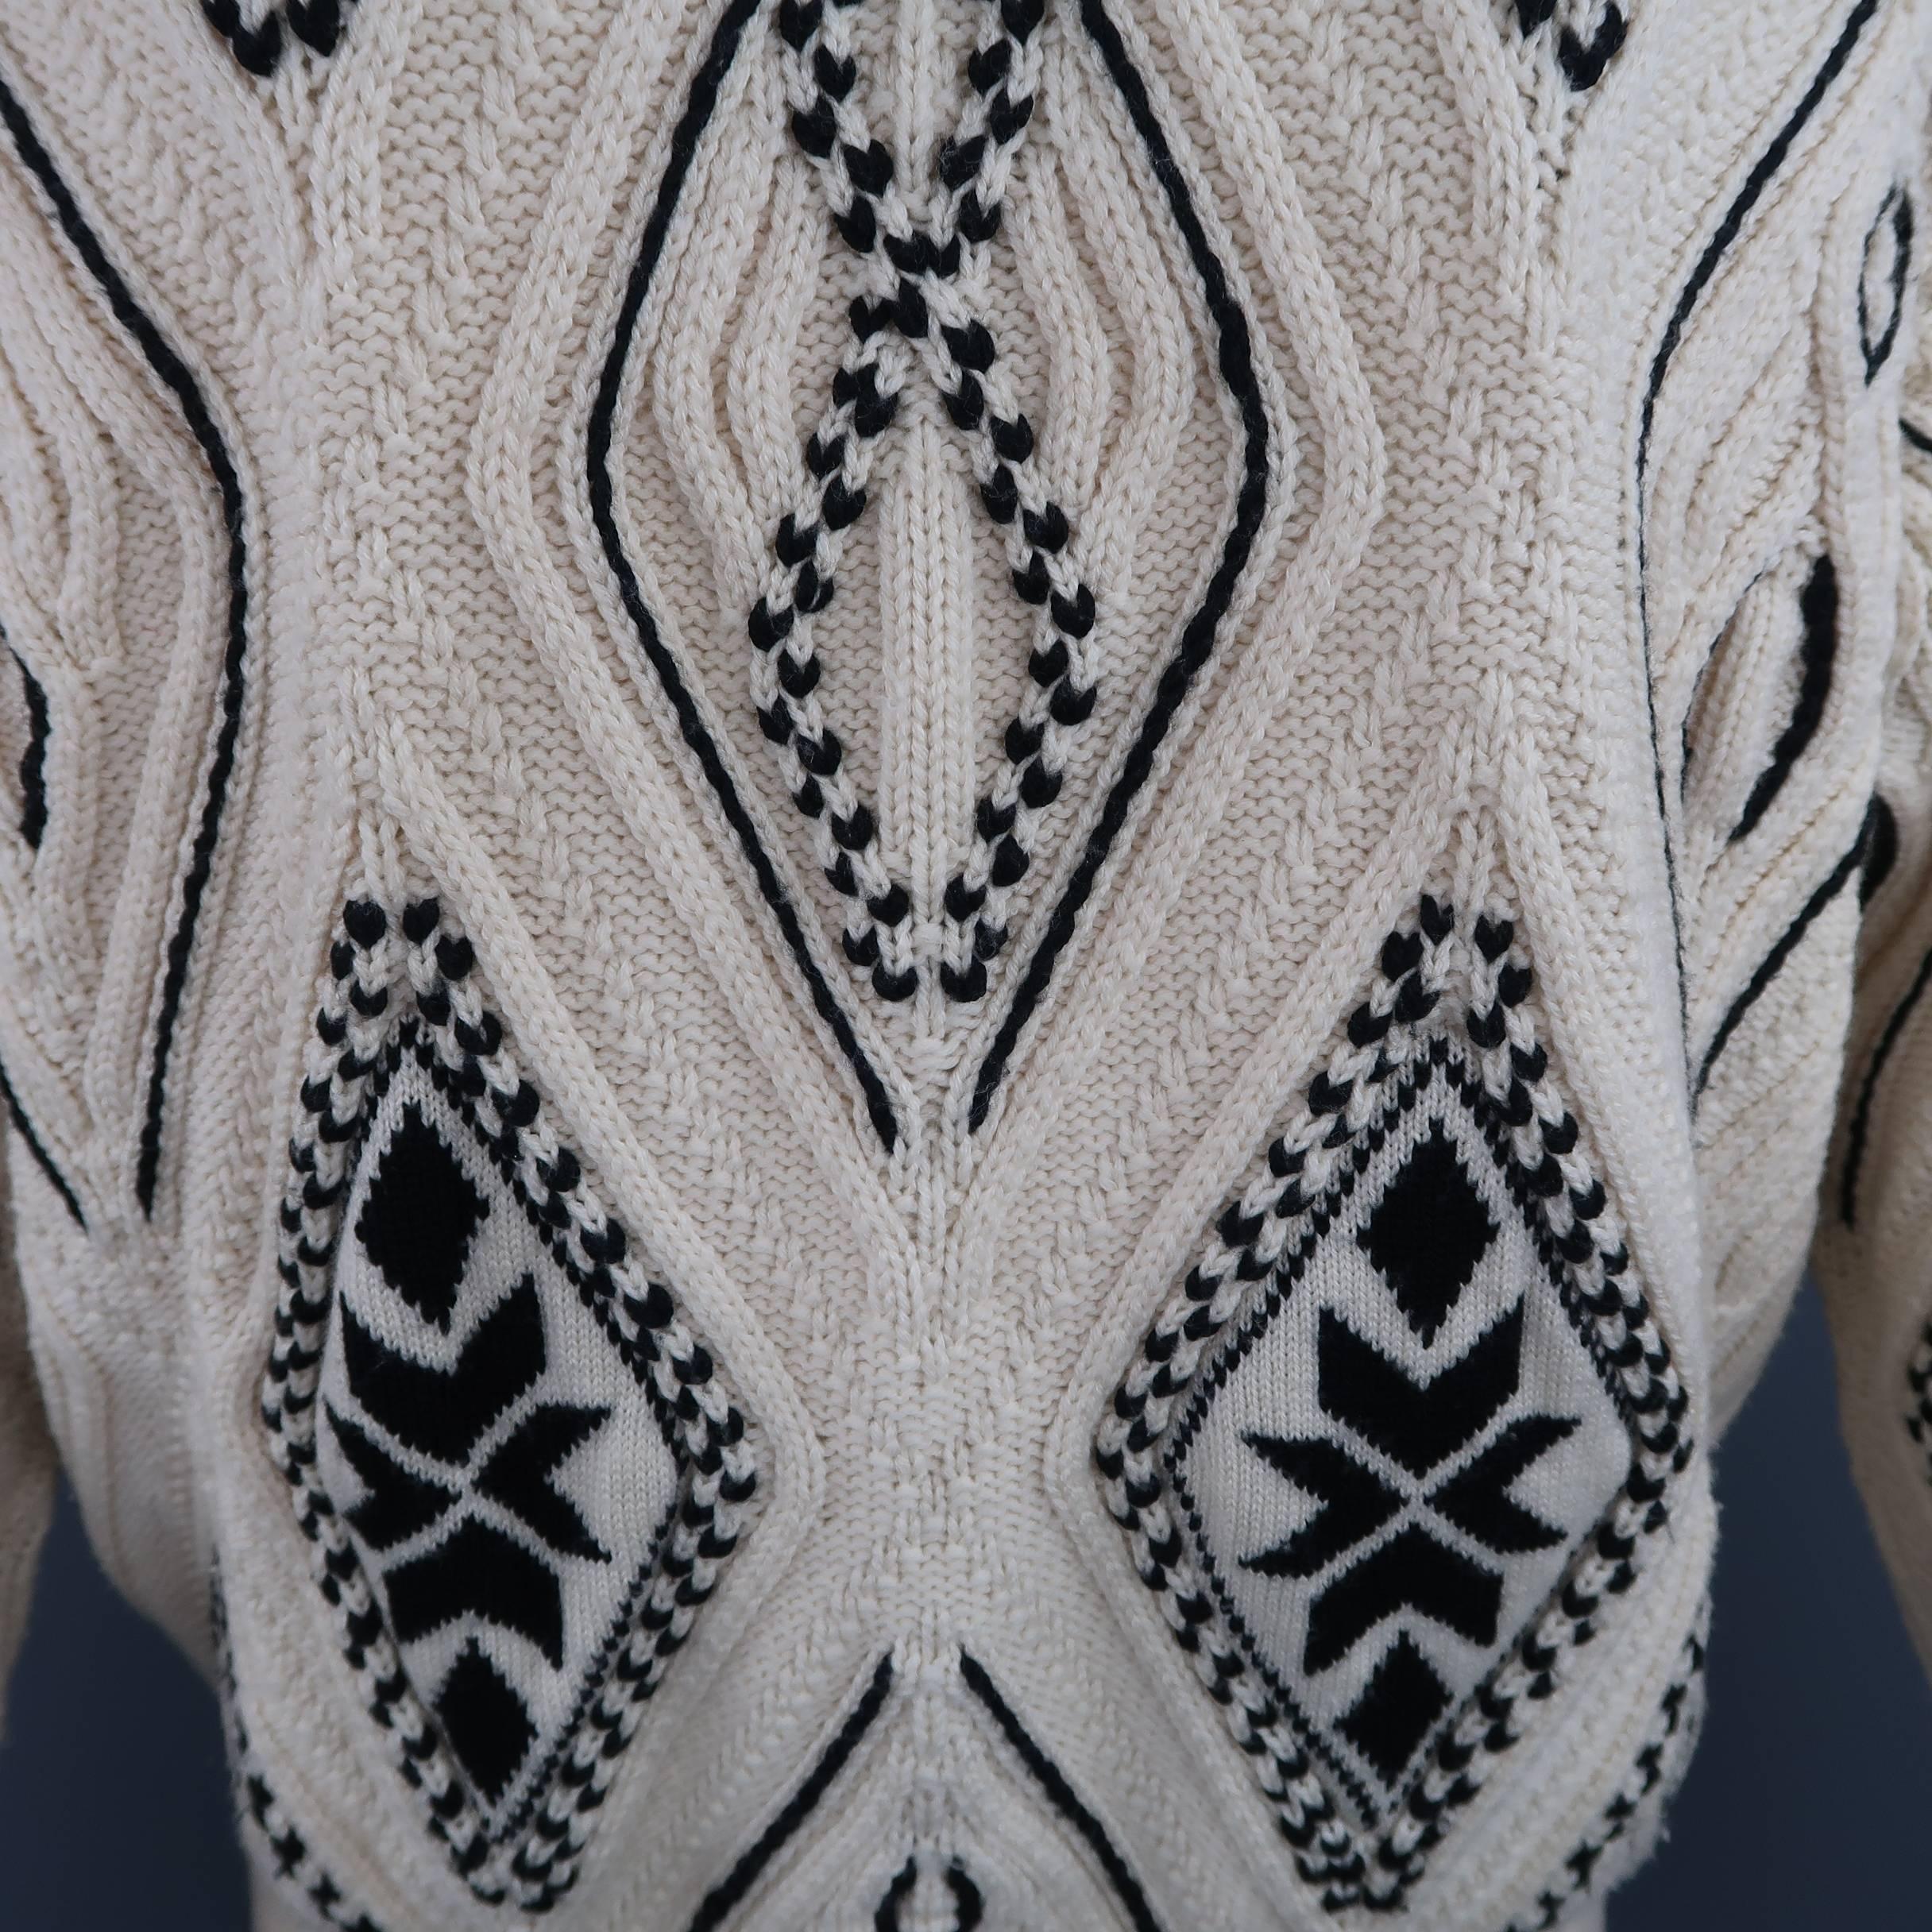 This vintage GIANFRANCO FERRE pullover sweater comes in a unique cream beige diamond knit with black pattern patches with a mock neck and drop shoulder sleeves. Hand Knitted. Made in Italy.
 
Good Pre-Owned Condition.
Marked: EU 50
 
Measurements:
